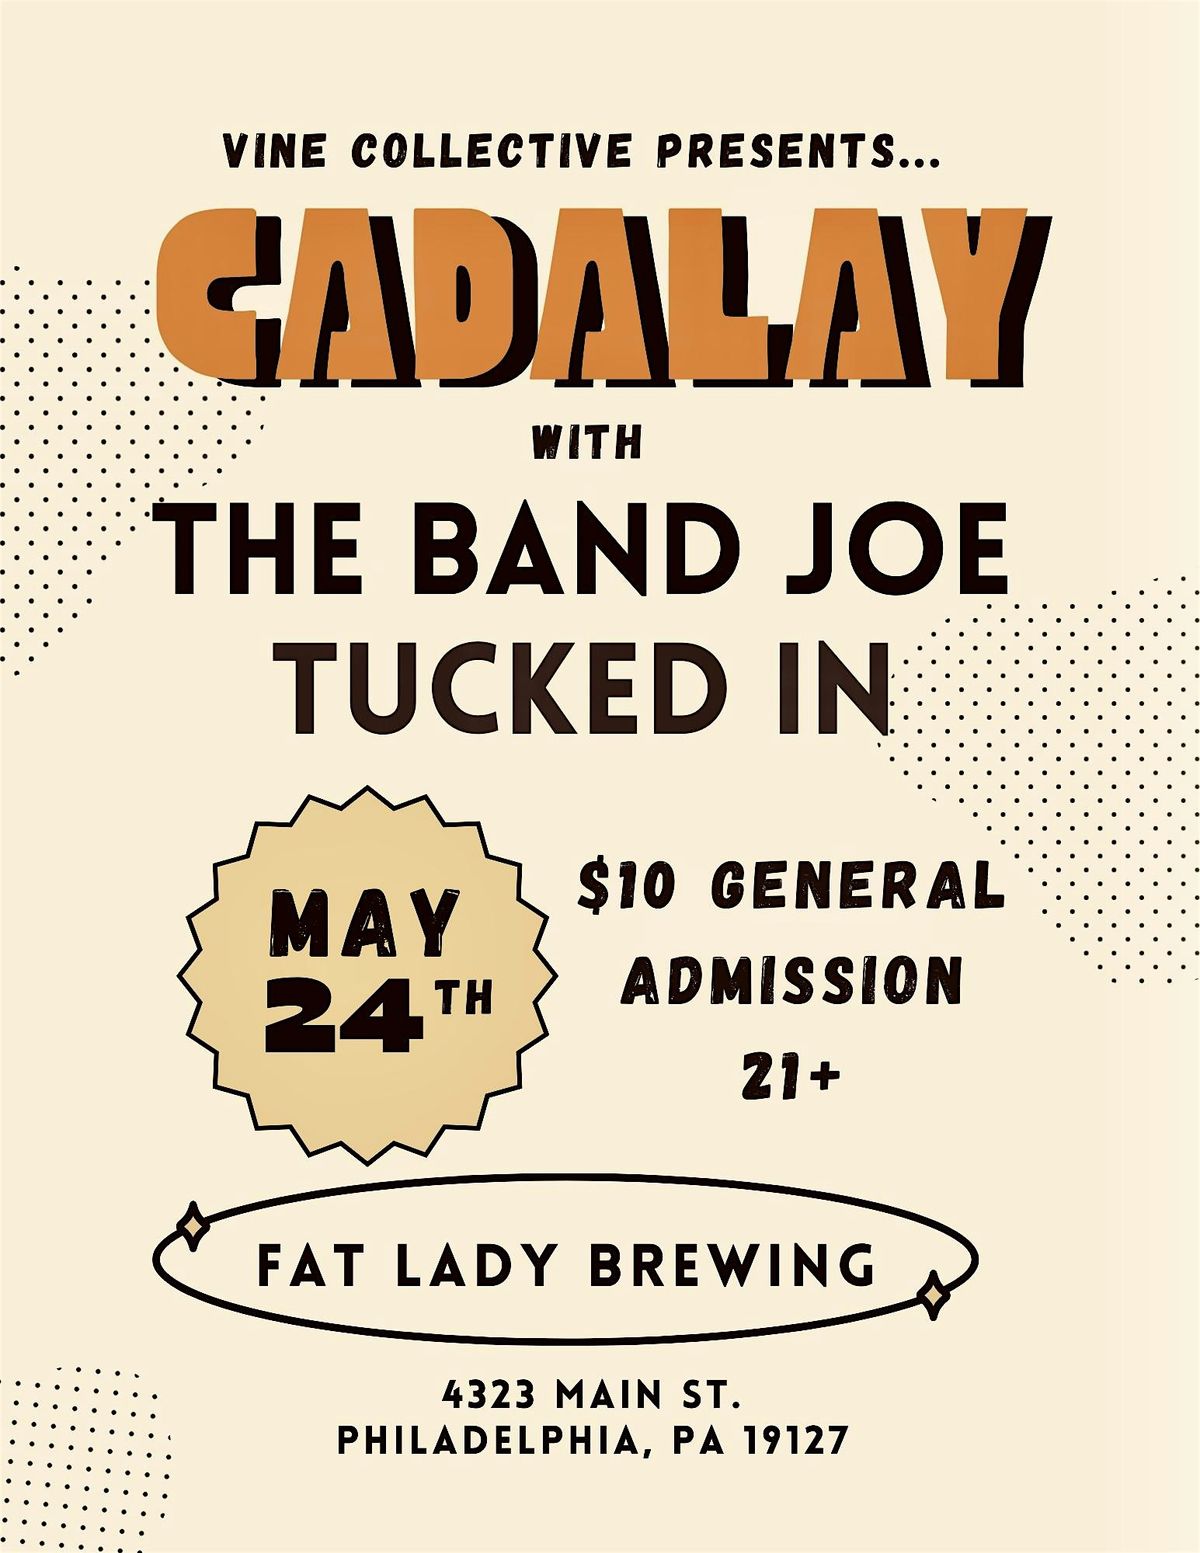 Cadalay with The Band Joe & Tucked In at Fat Lady Brewing